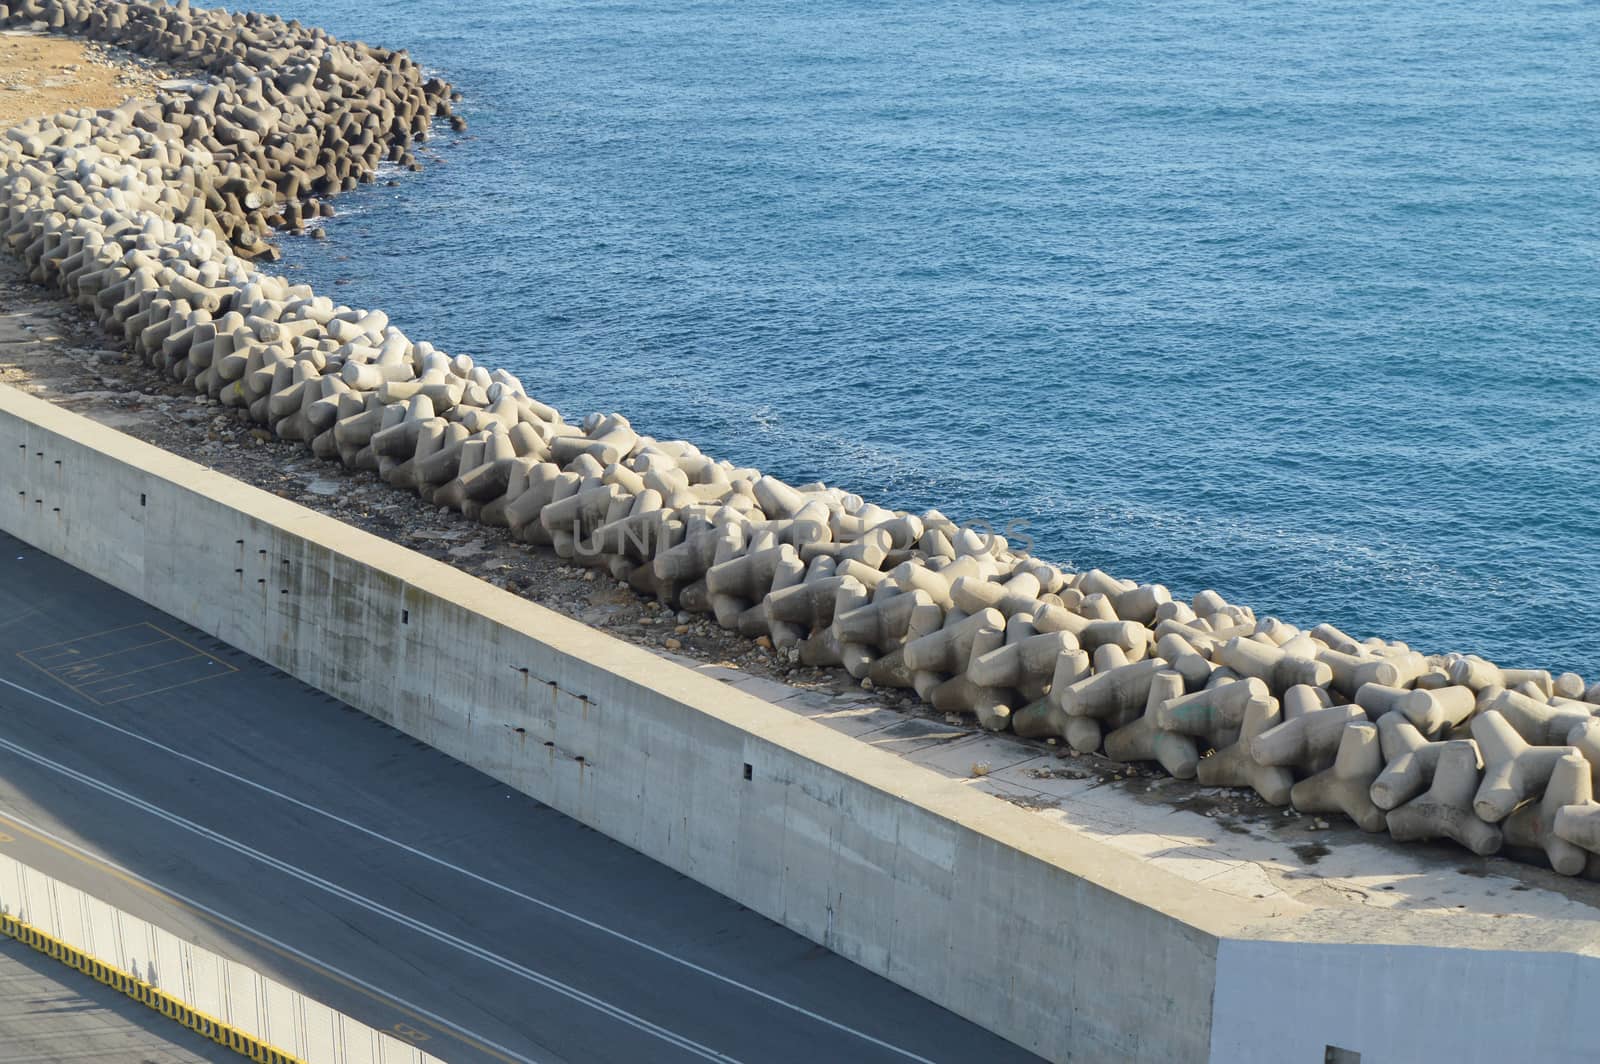 View of the stone and concrete breakwaters along the pier, the port of Civitavecchia, on 7 October 2018 by claire_lucia